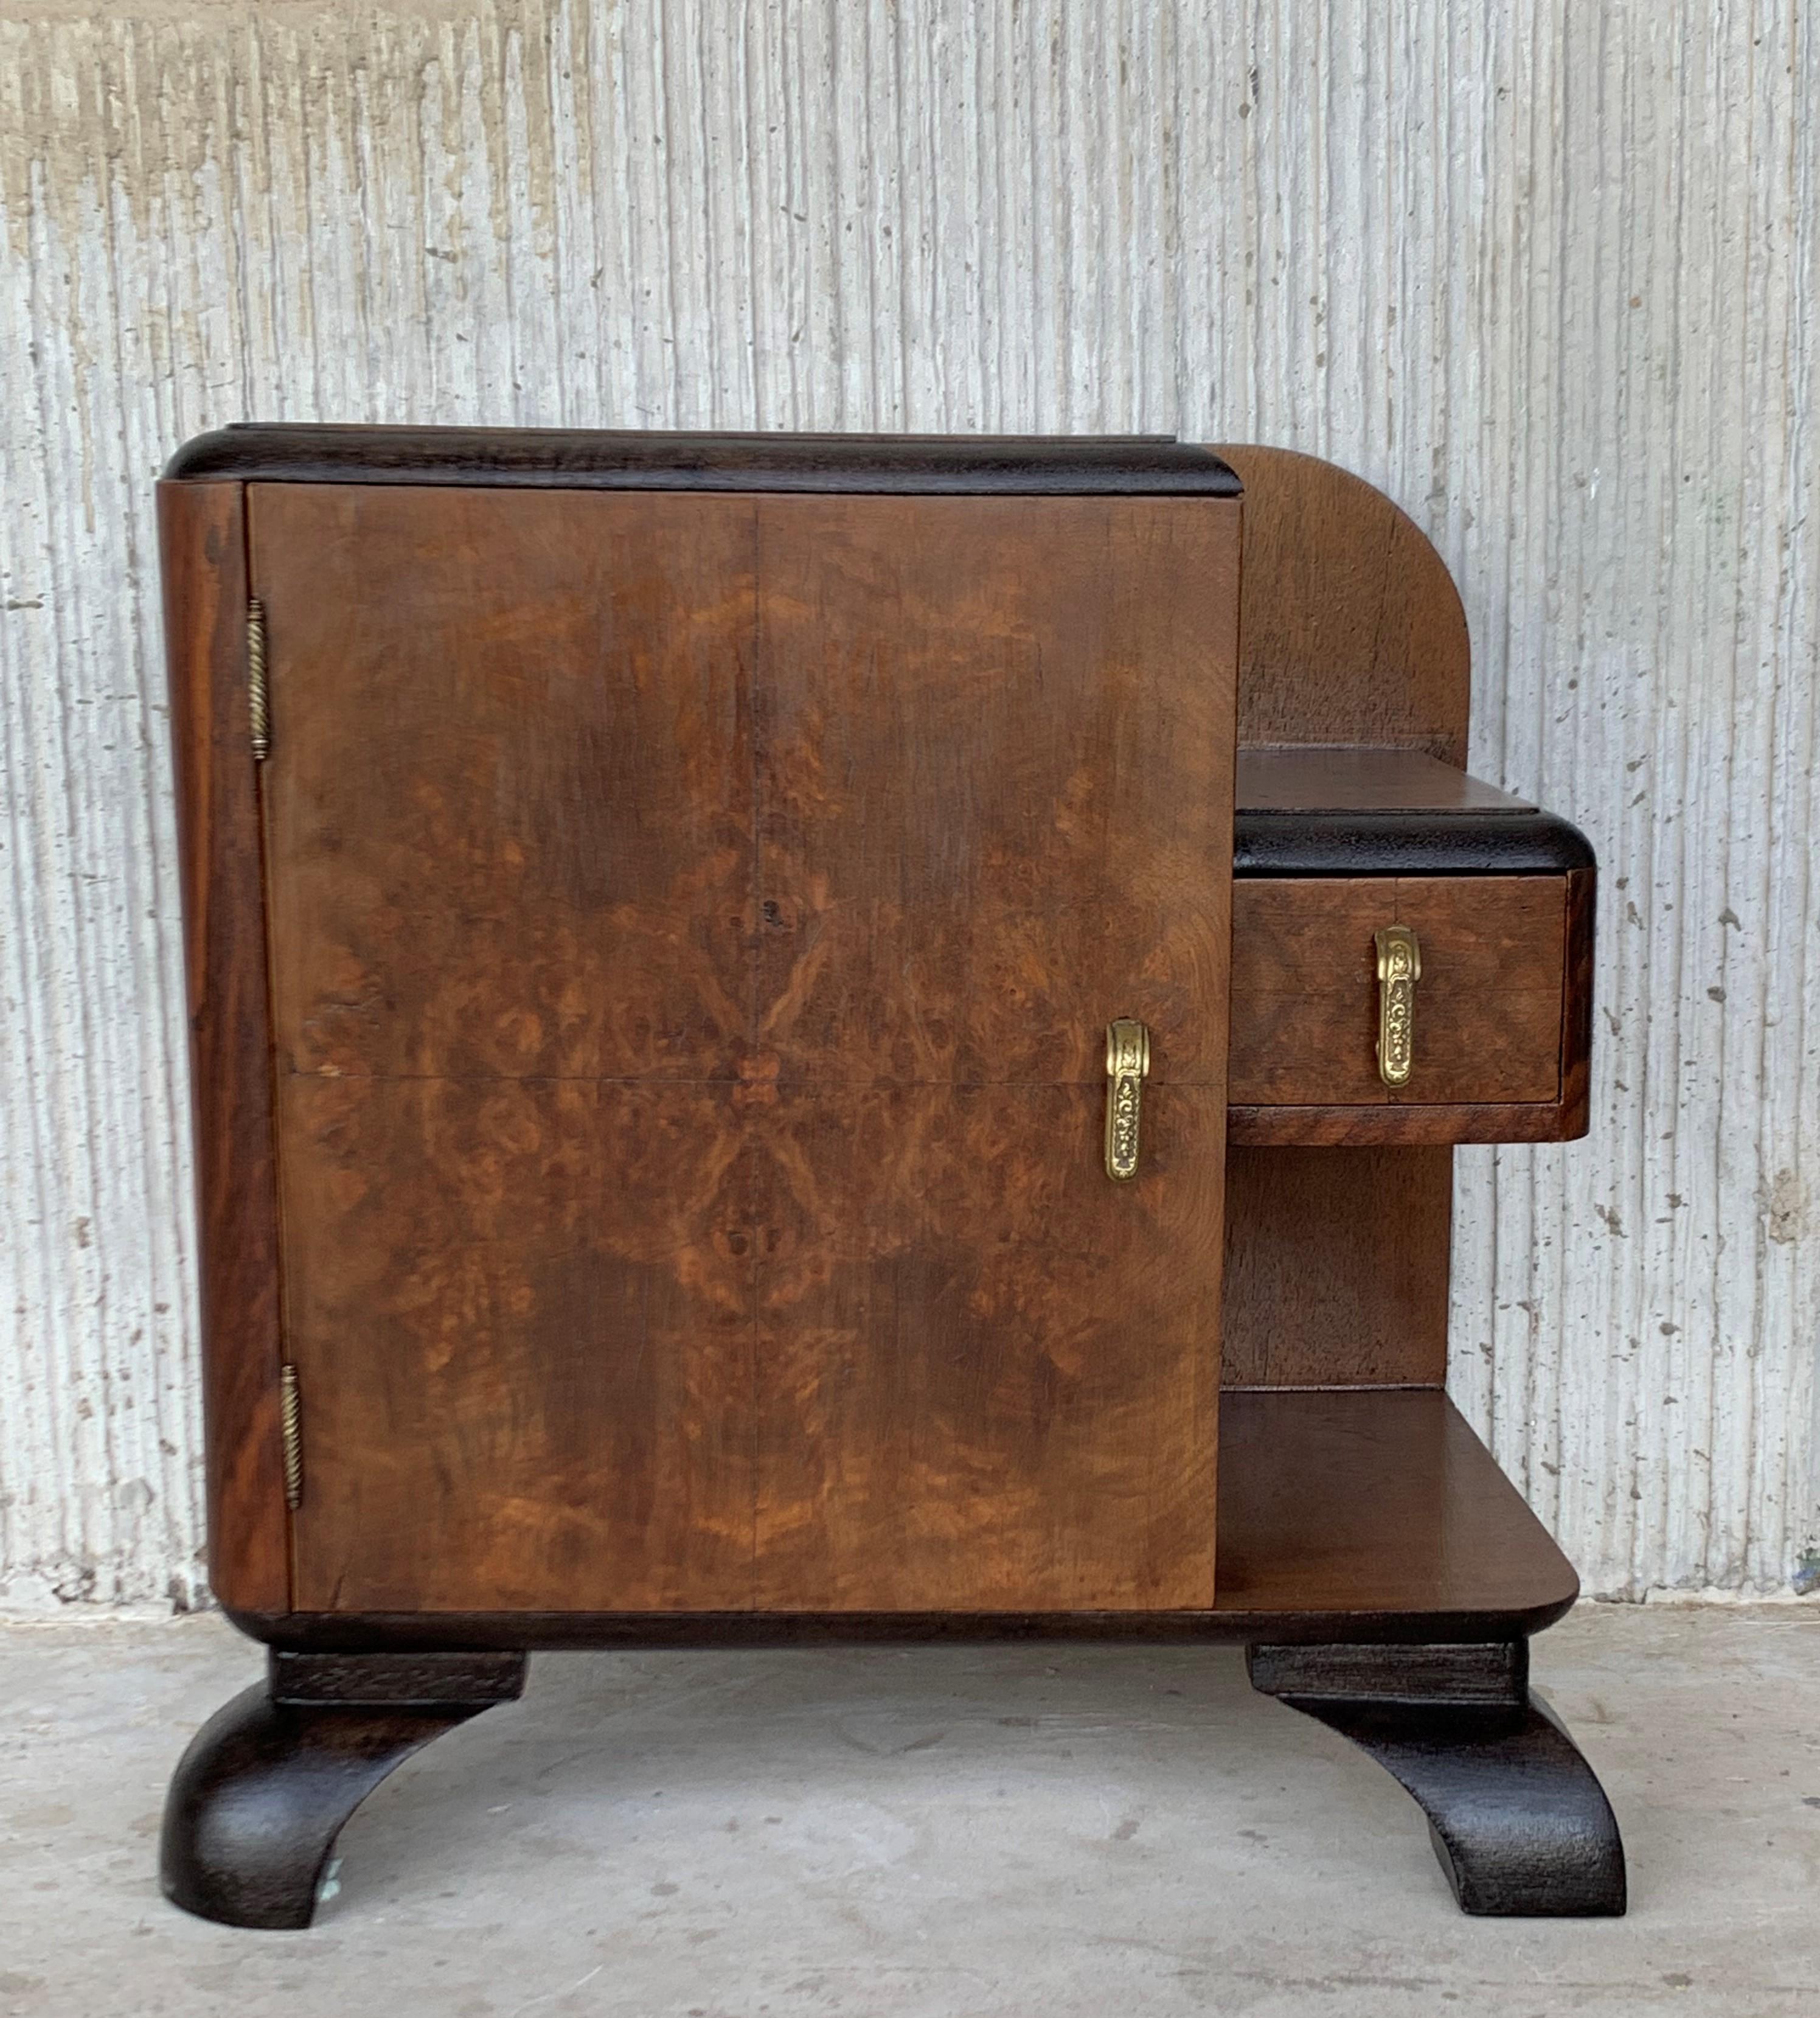 Pair of Mid-Century Modern front nightstands with original hardware and one hidden drawer and one exterior drawer like a shelve.
This beautiful pair of vintage modern nightstands feature two cabinet doors that open to unveil a large compartment for